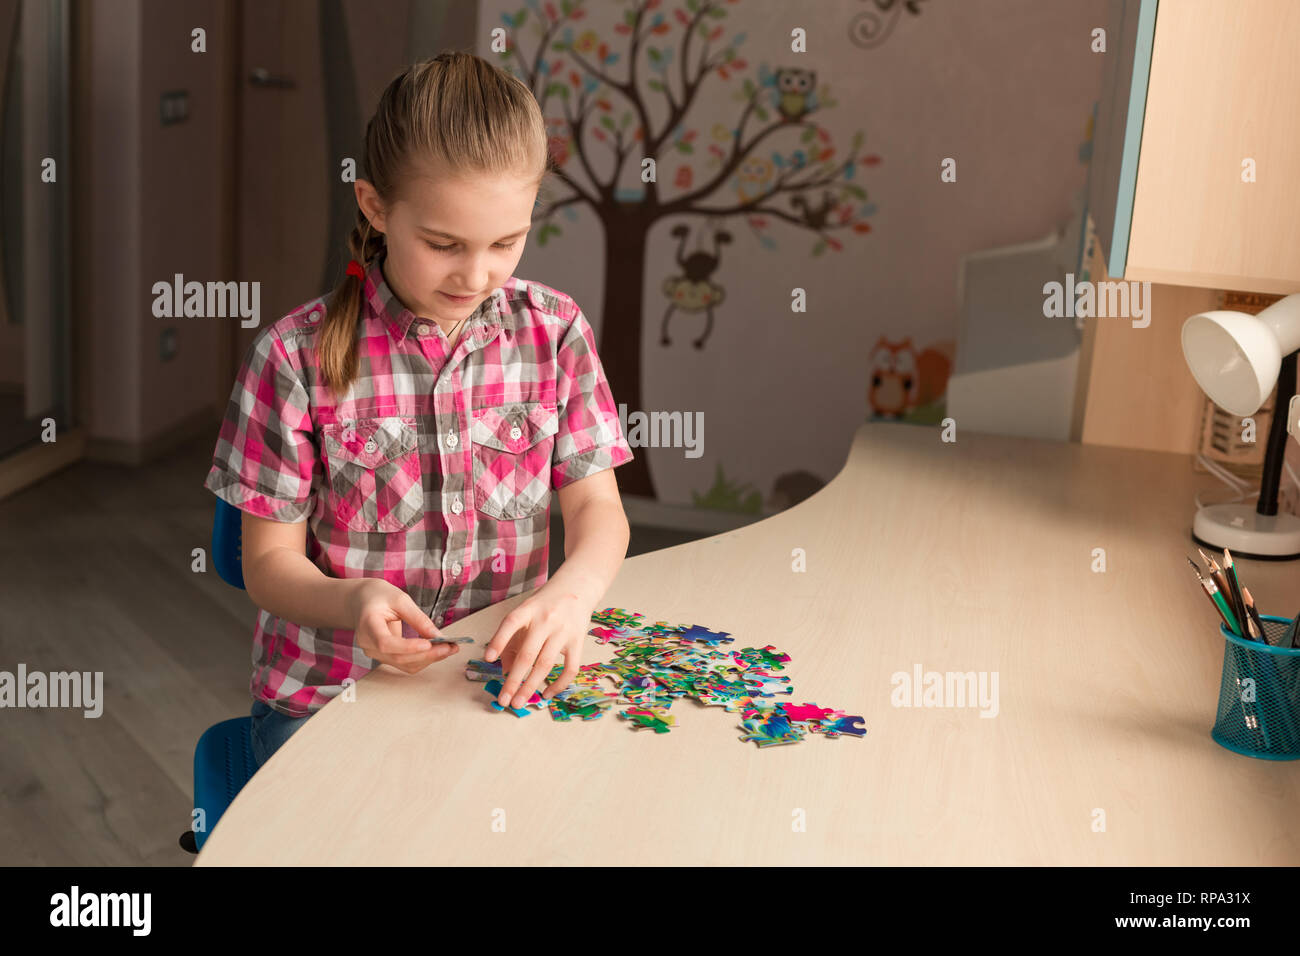 Cute little girl solving puzzle together sitting at the table Stock Photo